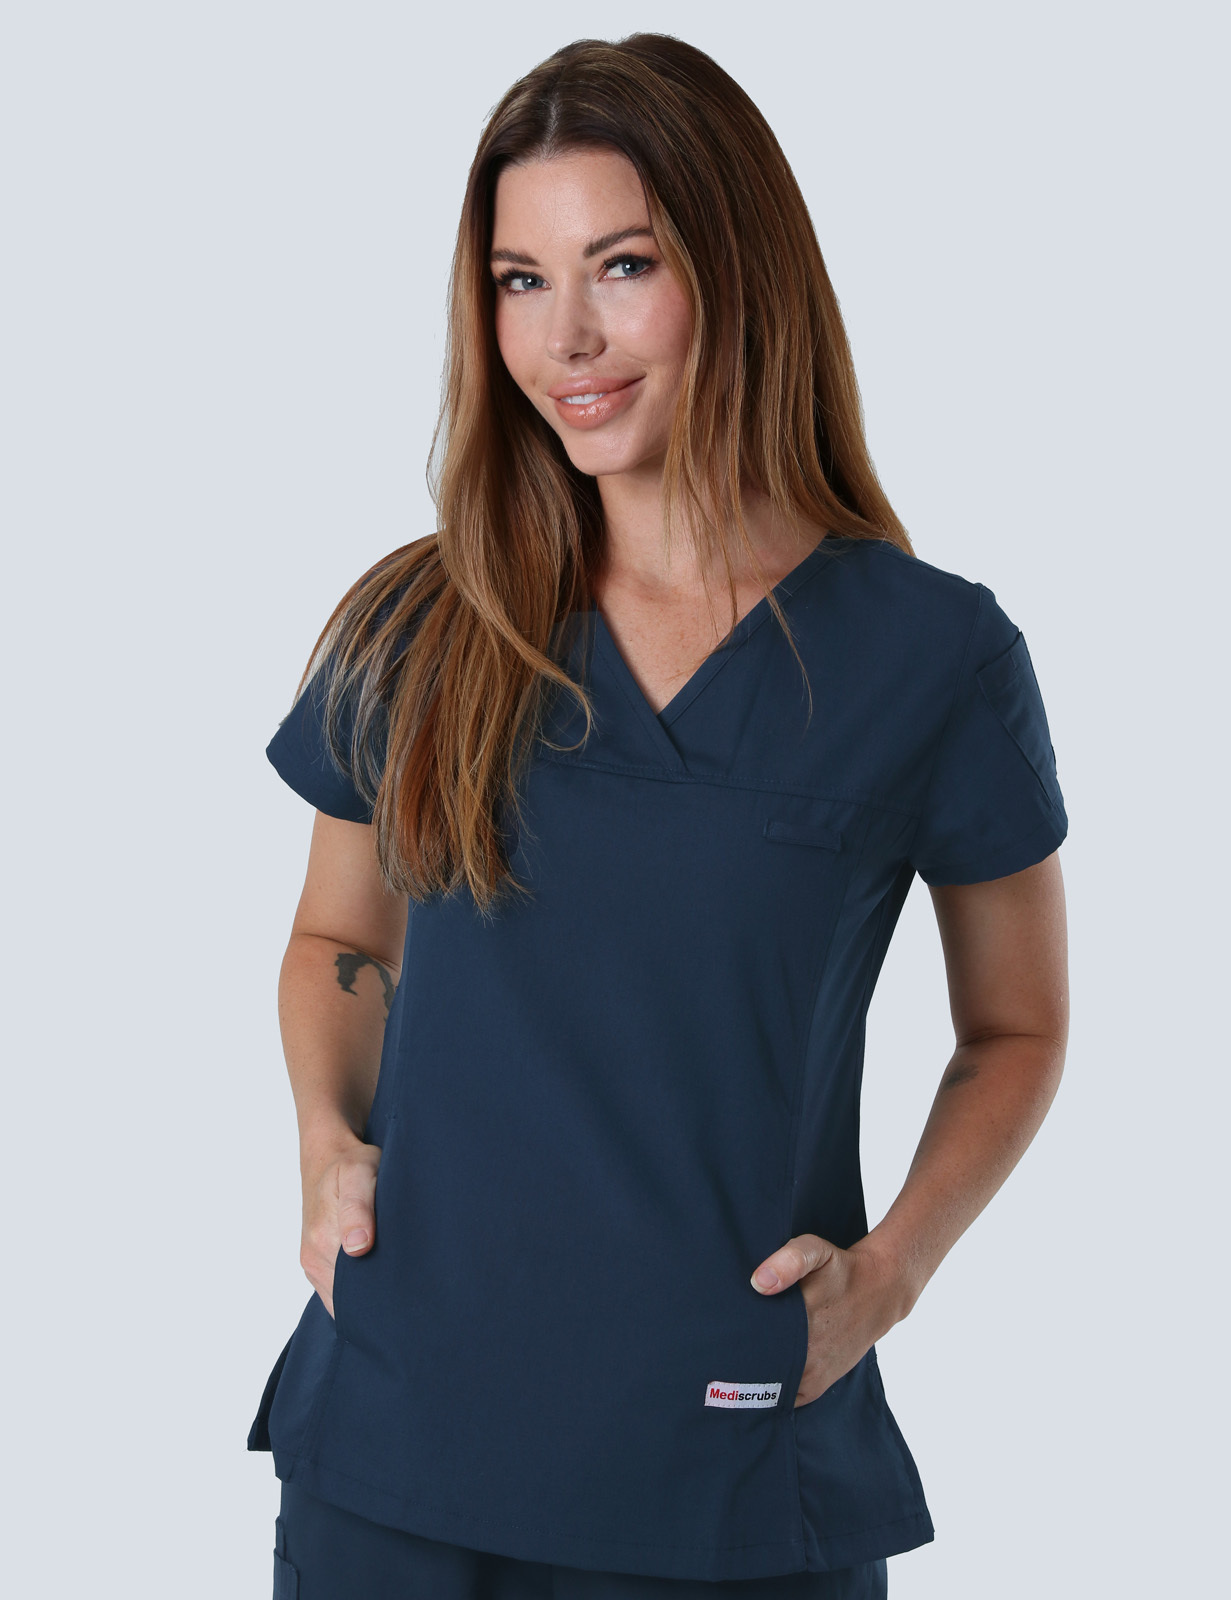 Royal Hobart Hospital Emergency Department Doctor Uniform Set Bundle (Women's Fit Solid Top and Cargo Pants in Navy incl Logo)